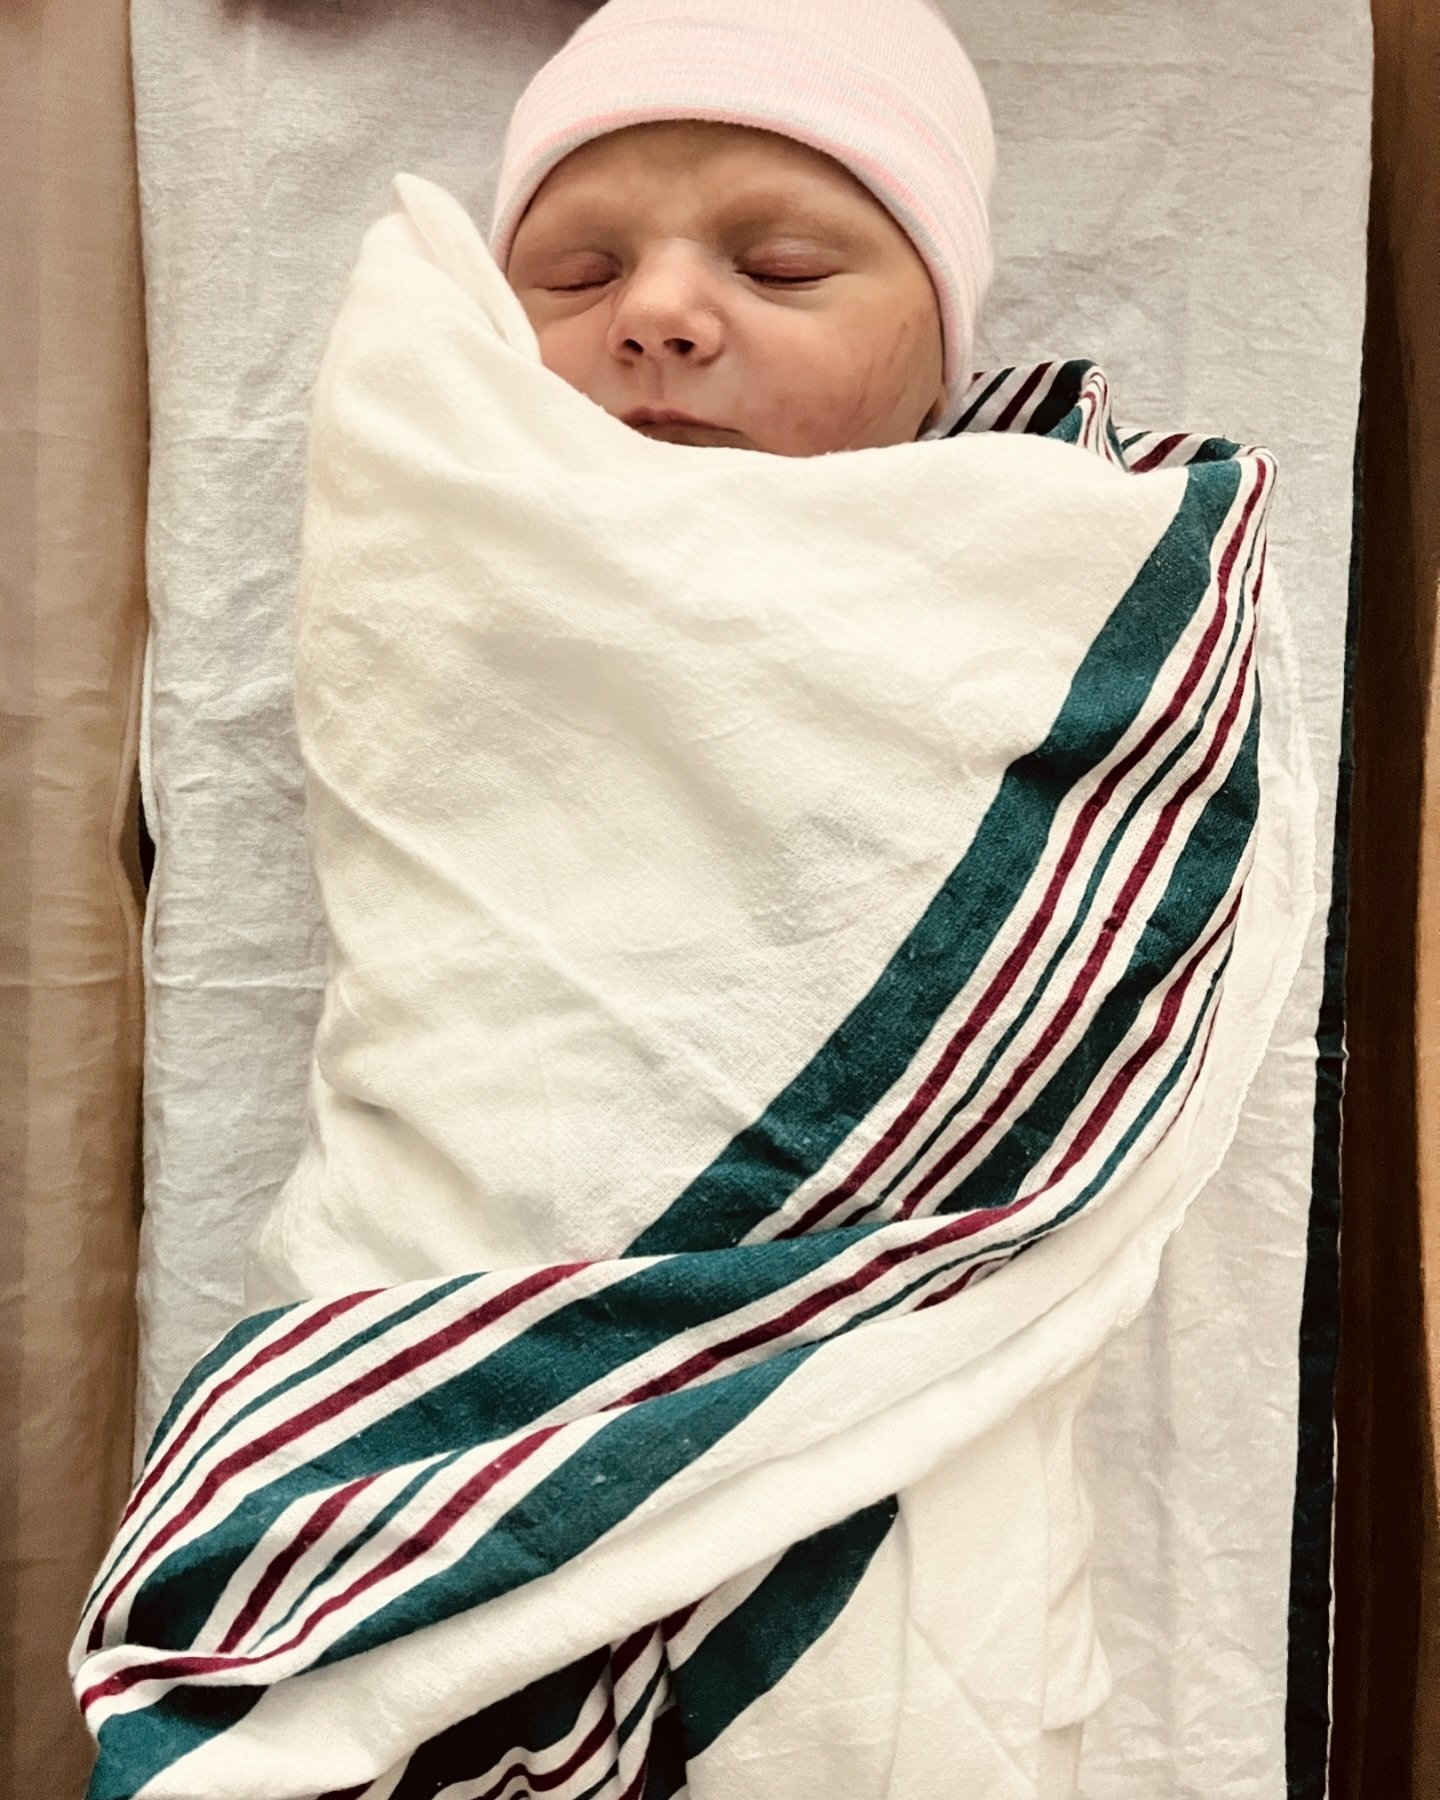 There&rsquo;s someone I&rsquo;d like you to meet 🥰
Austin Bolch made his way into the world exactly on time last month (I&rsquo;m clearly in a newborn fog over here 😅). We are smitten with our sweet, tall (‼️), wide-eyed, April boy.💙